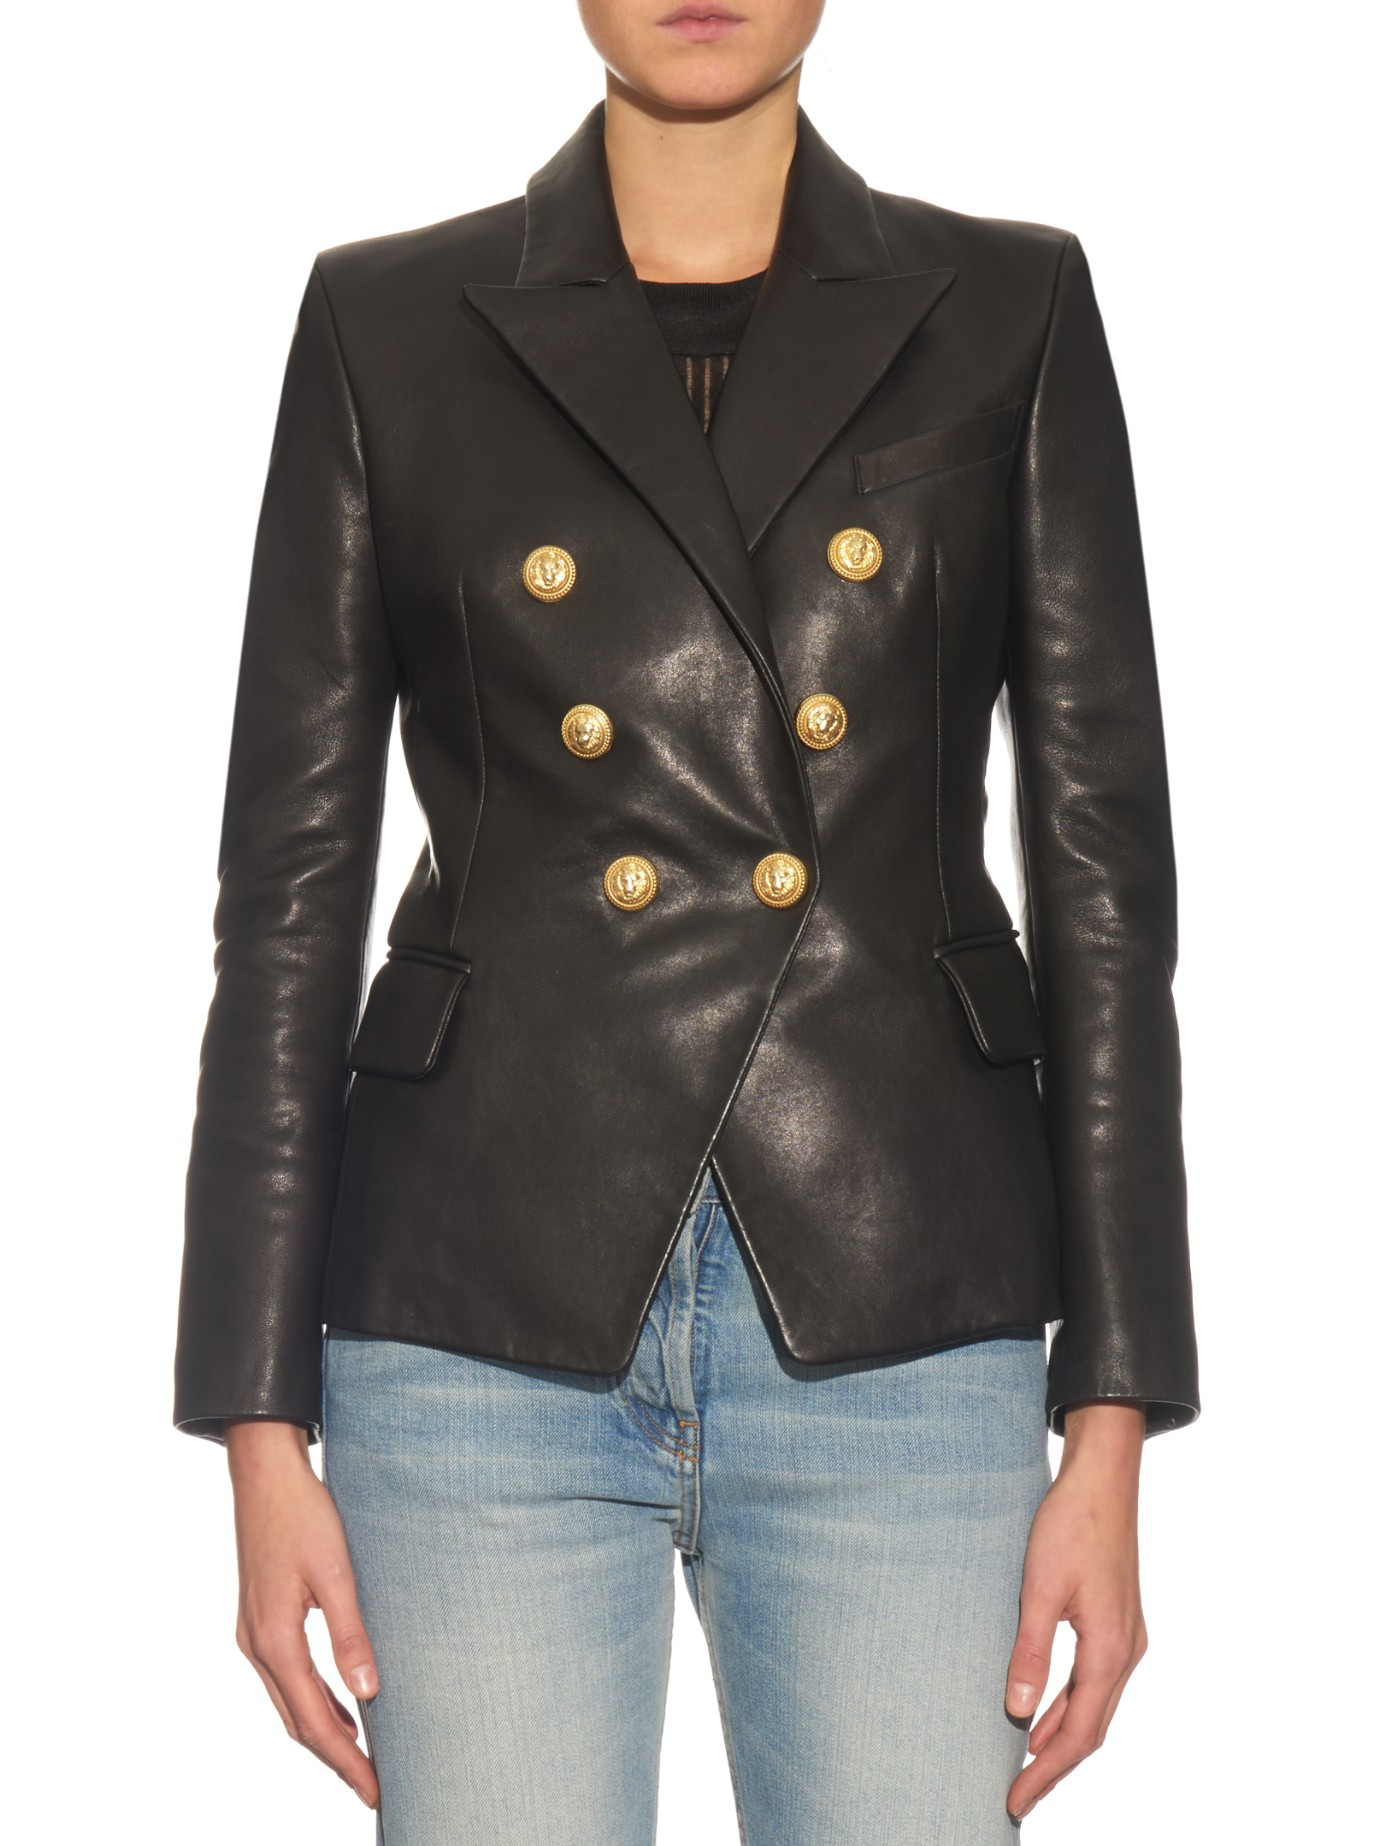 Lyst - Balmain Double-Breasted Leather Jacket in Black